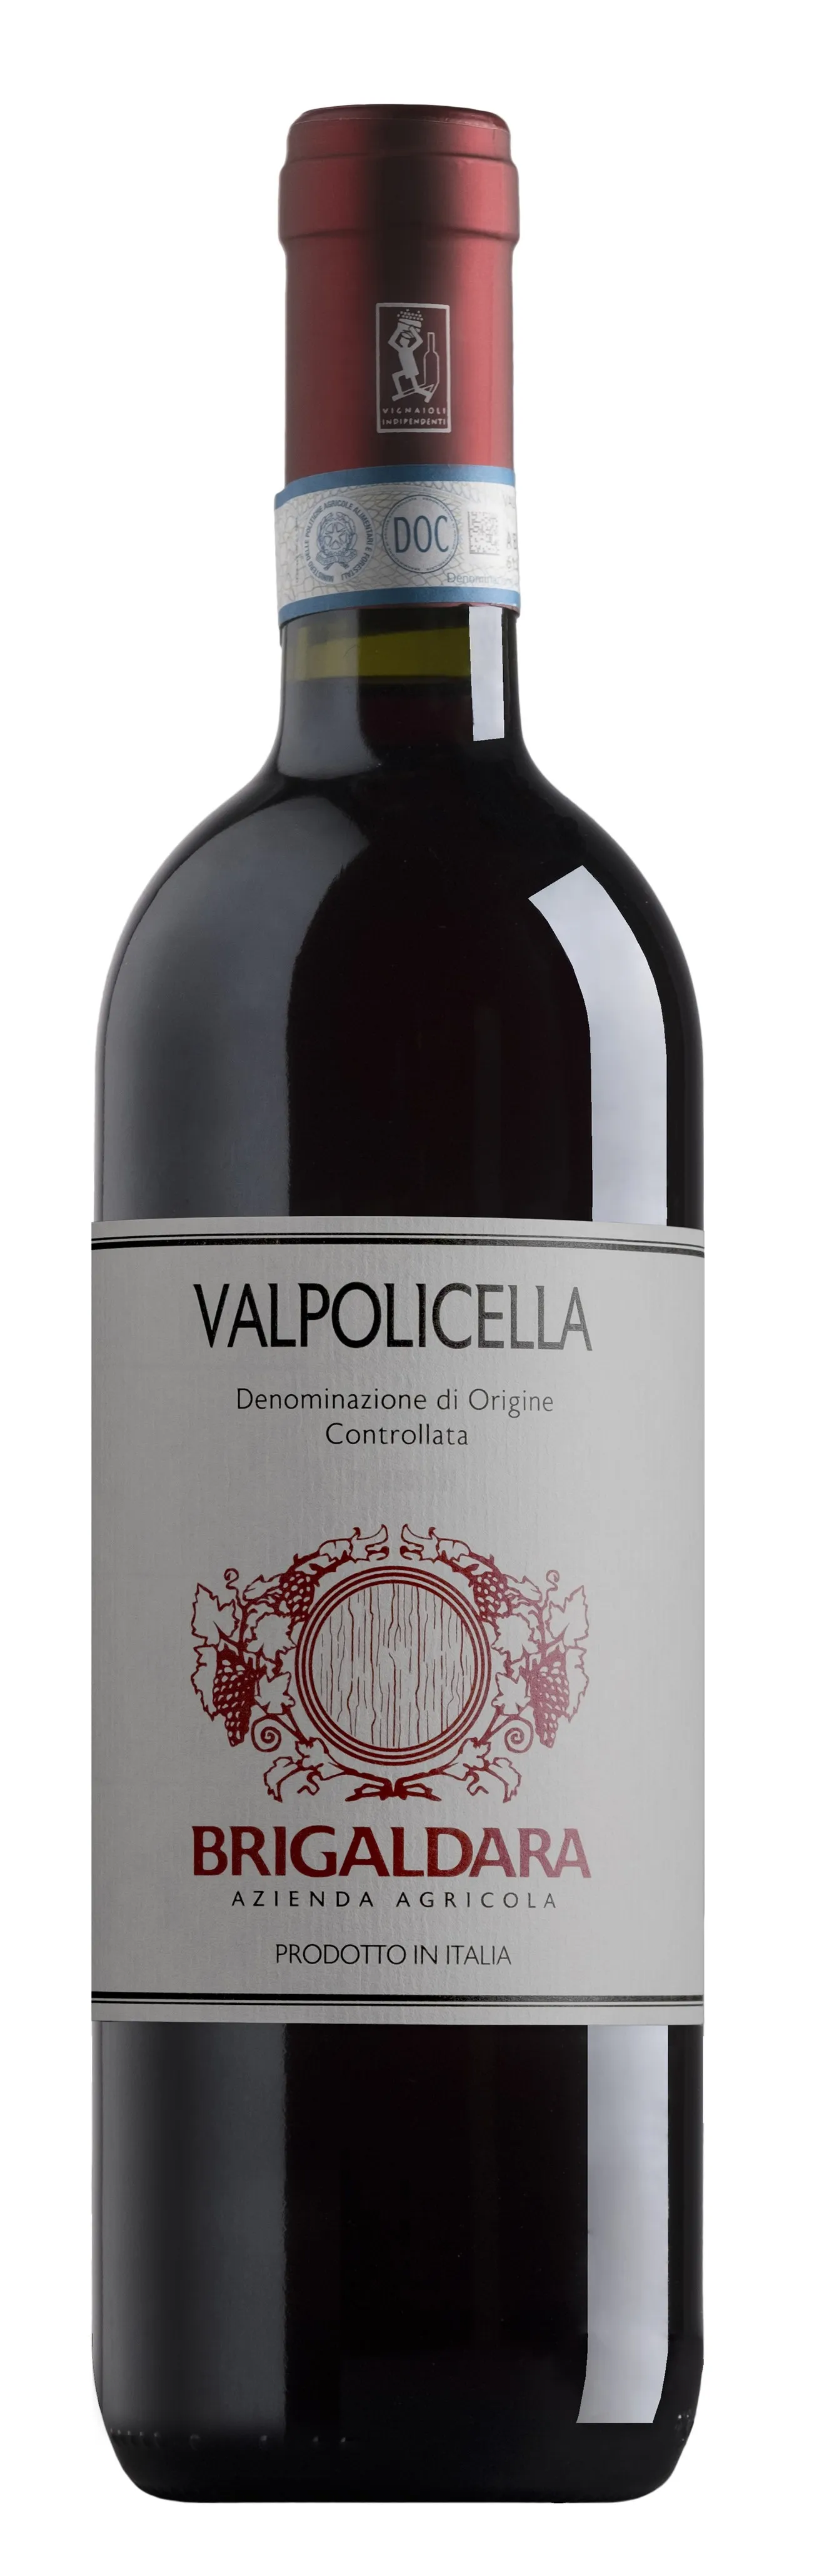 Bottle of Brigaldara Valpolicella from search results